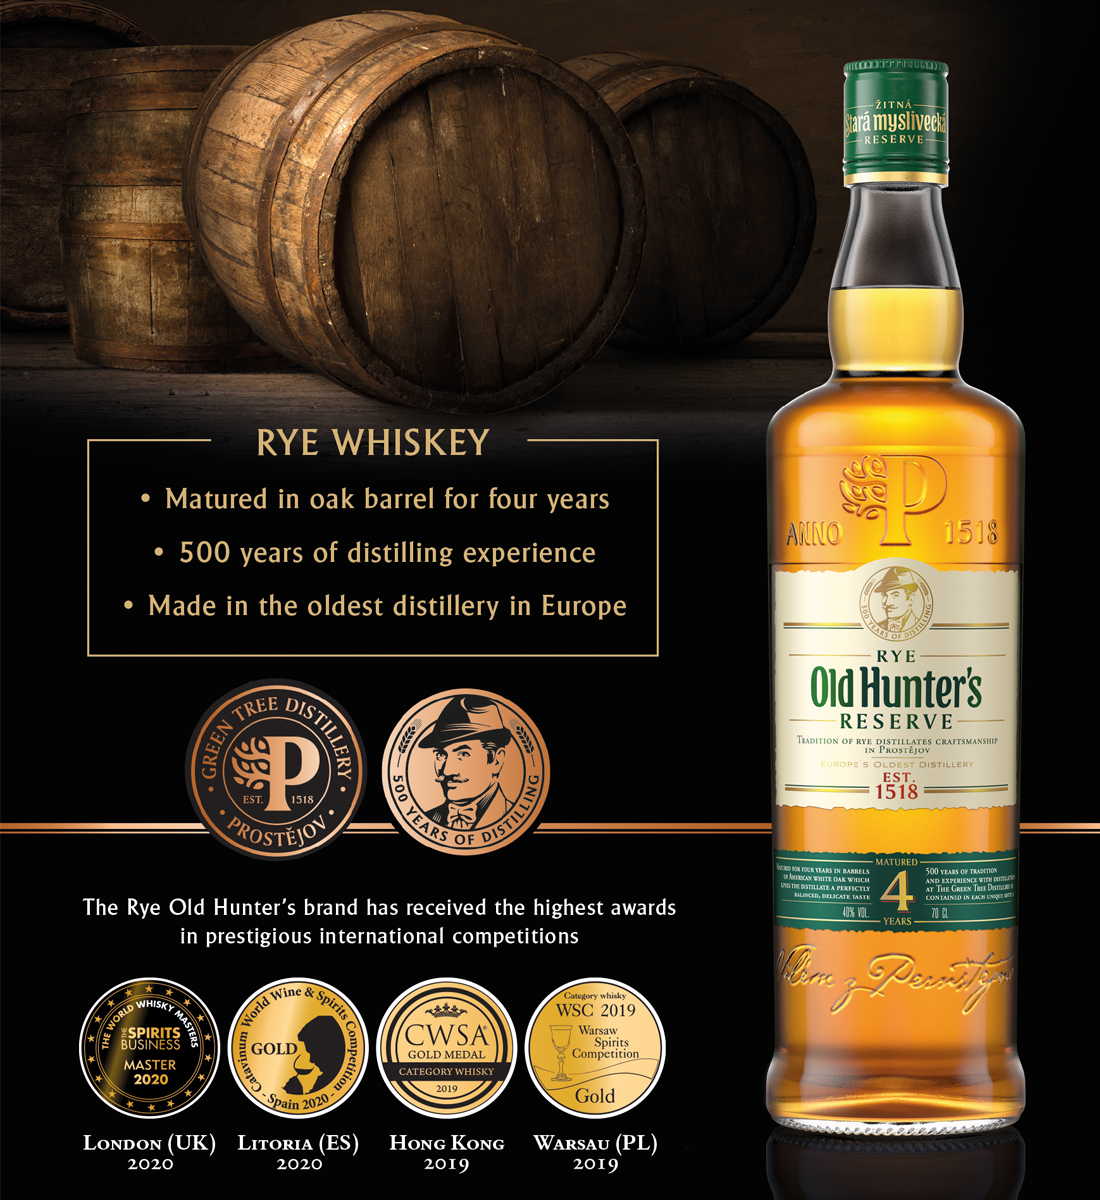 Whisky Old Hunter’s Reserve Rye Traditional 4 ani 0.7L 0.7L